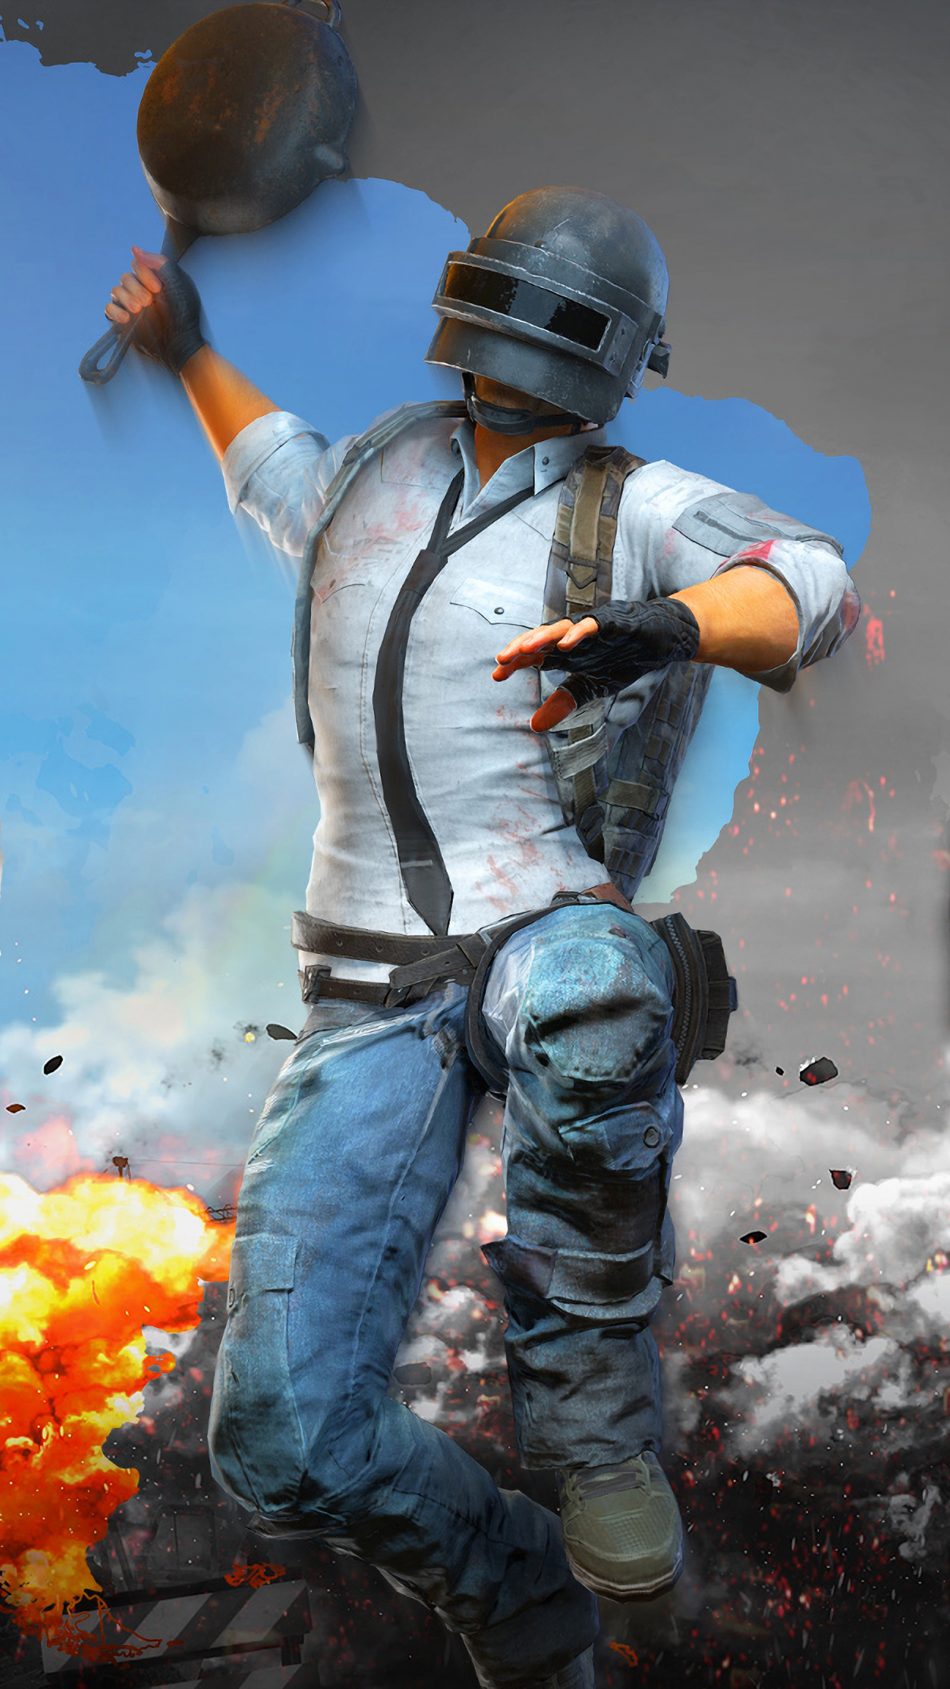 PUBG Helmet Guy Attacking With Pan 4K Ultra HD Mobile Wallpaper